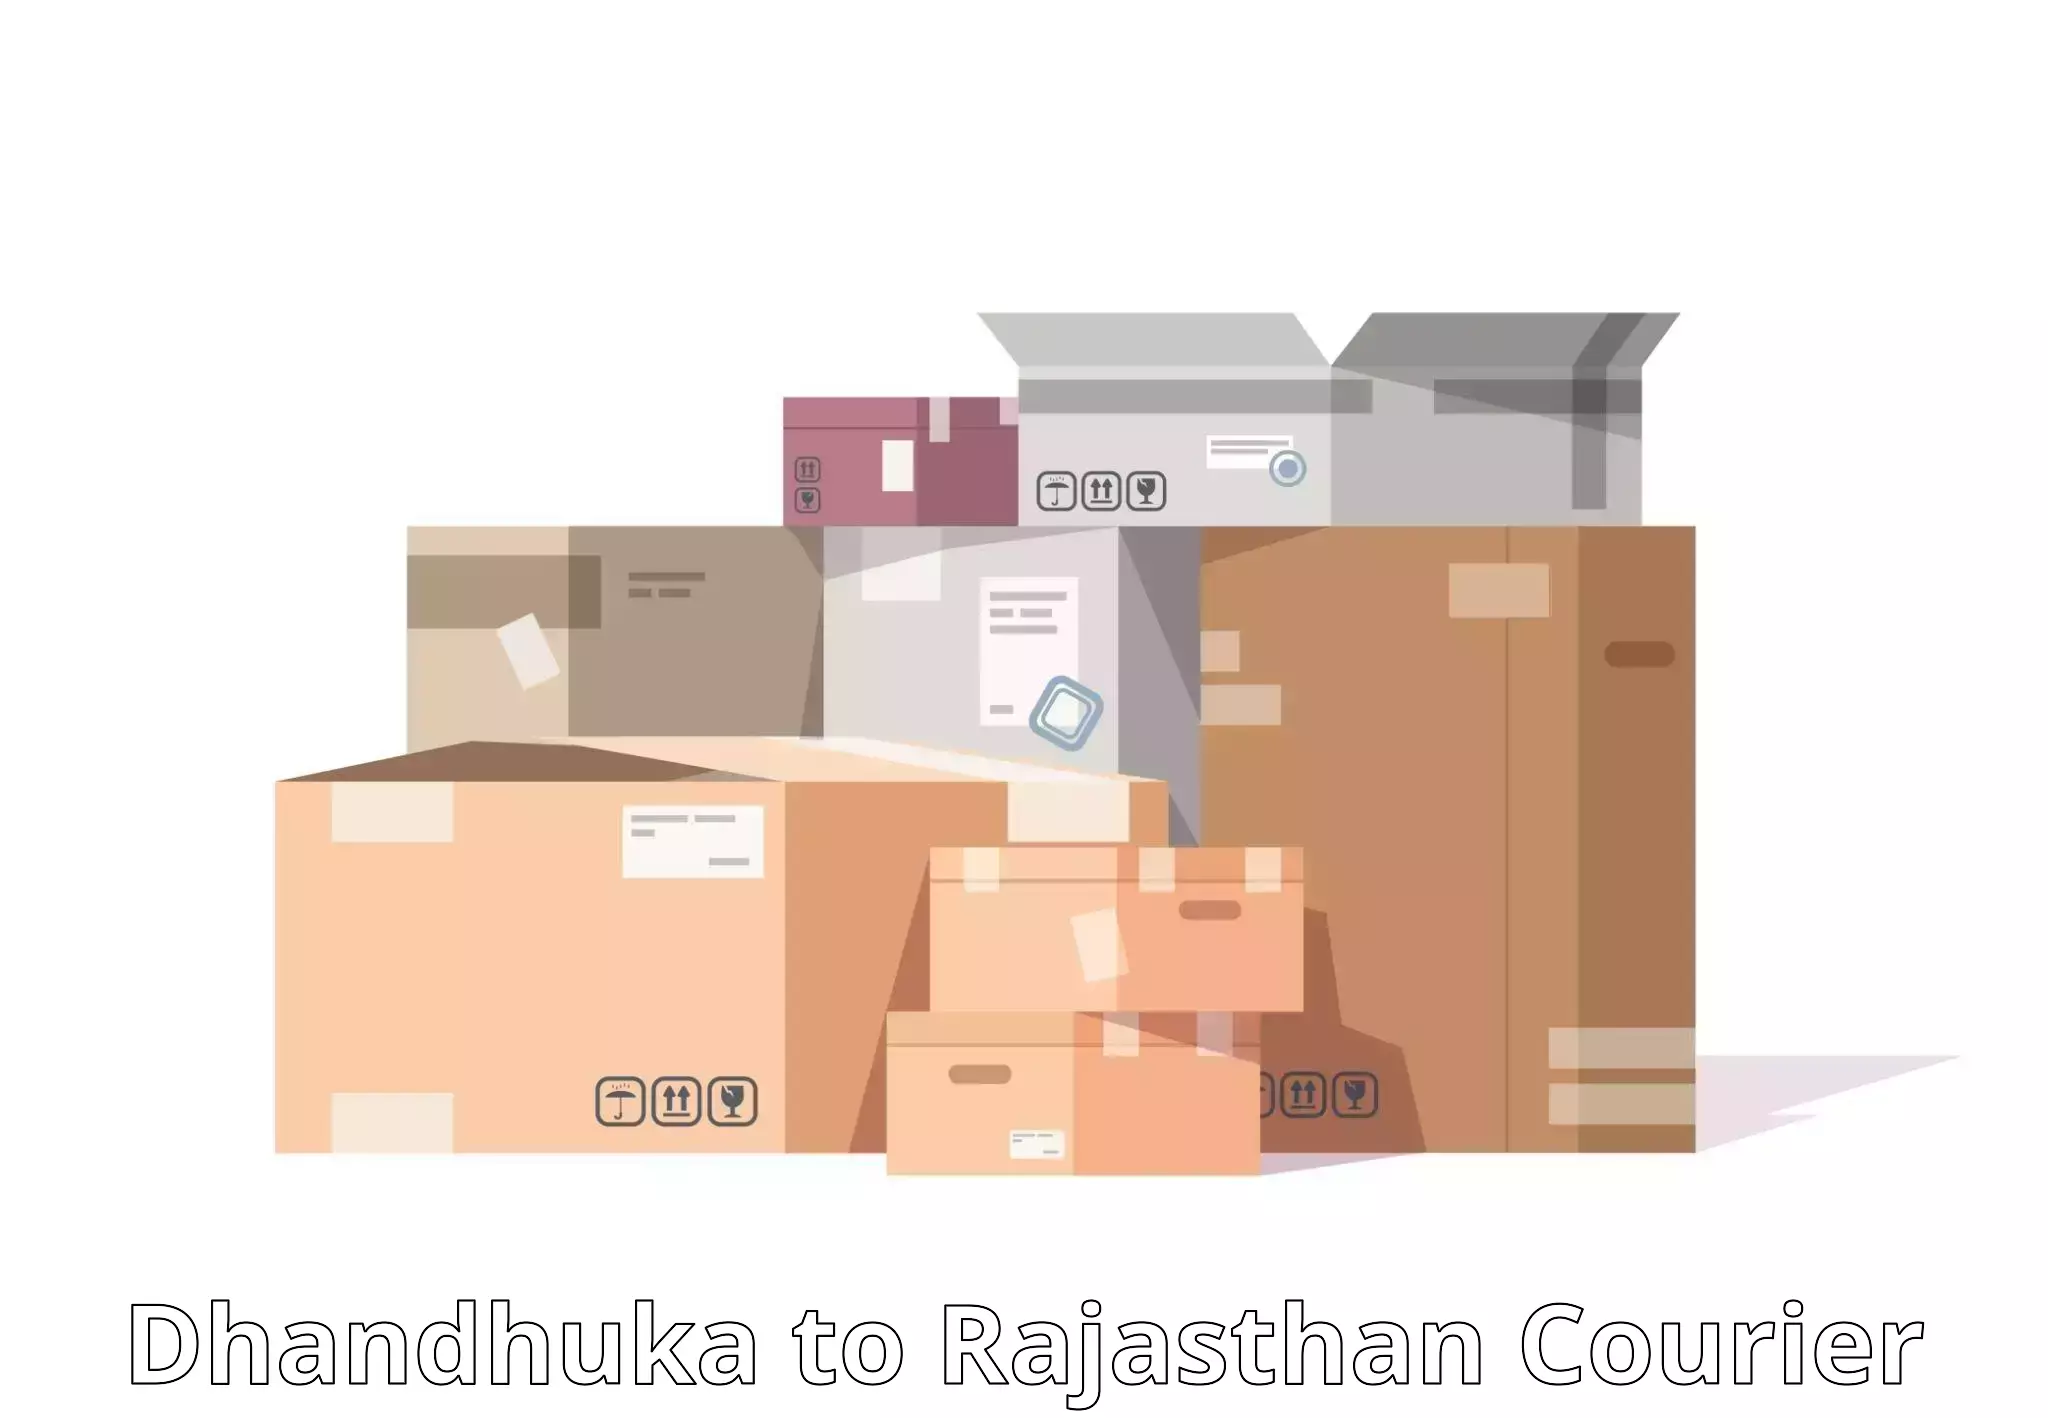 Multi-national courier services in Dhandhuka to Mathania